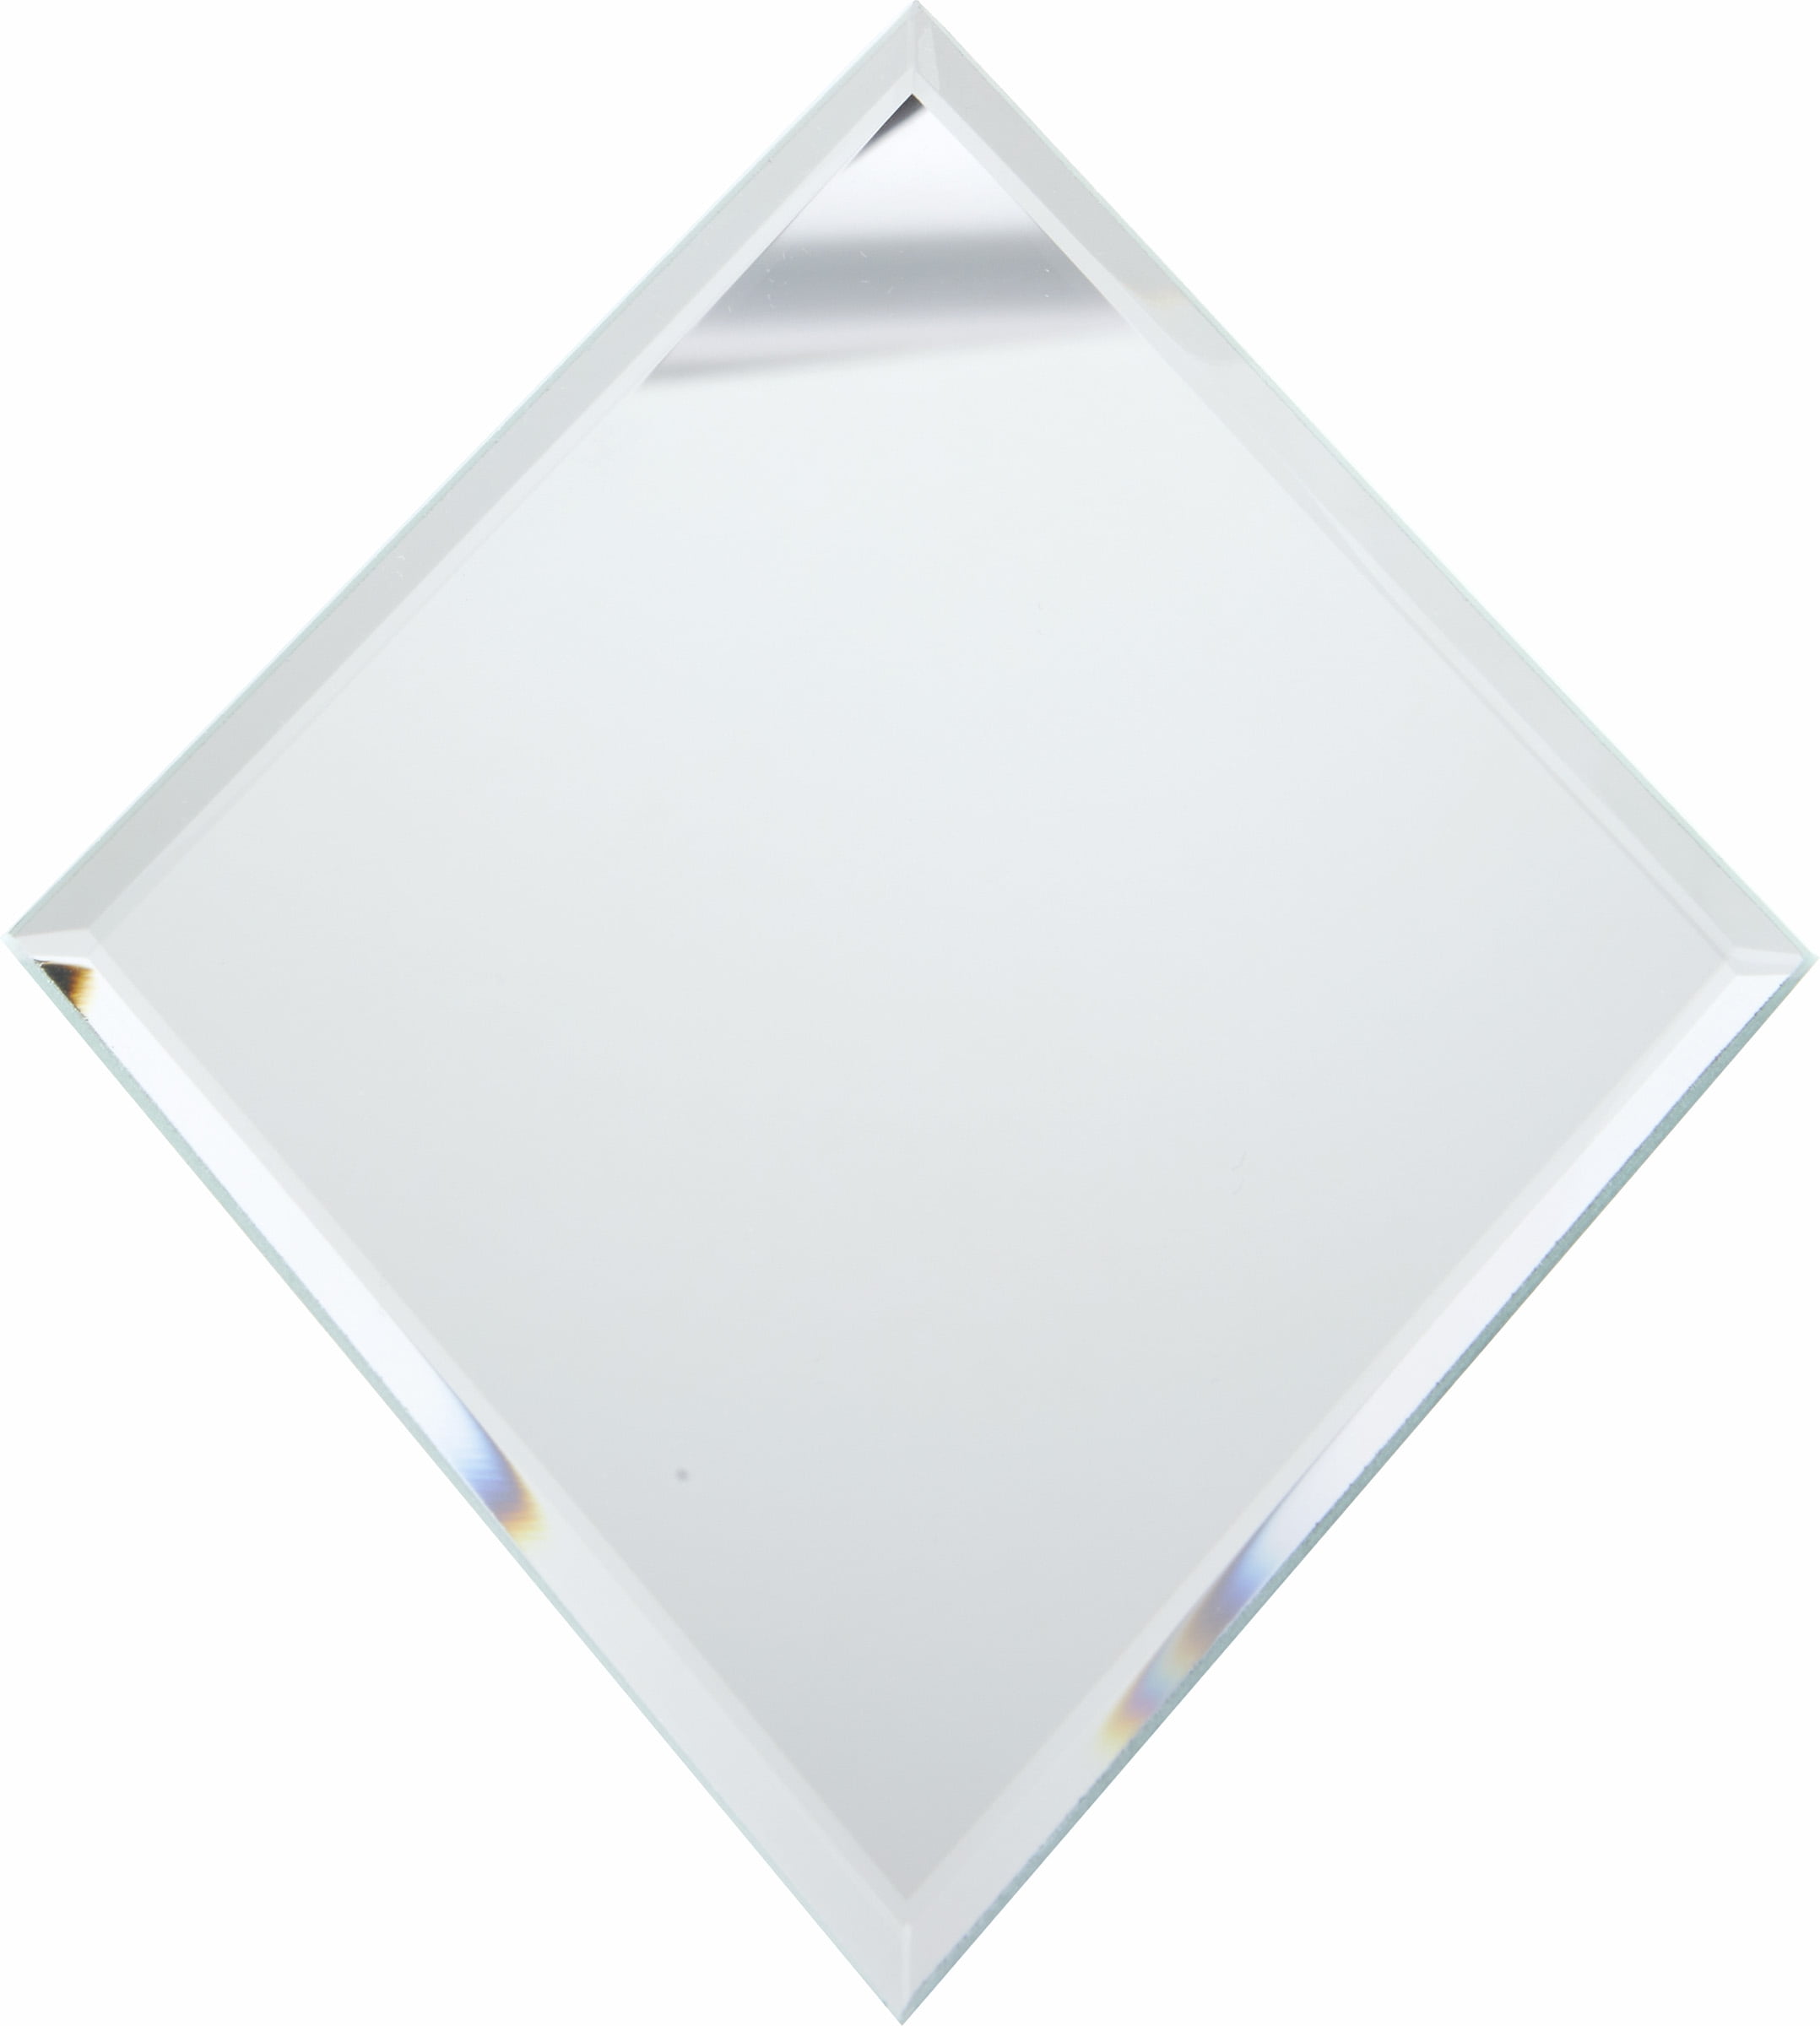 Plymor Square 3mm Beveled Glass Mirror Pack of 6 2.5 inch x 2.5 inch 